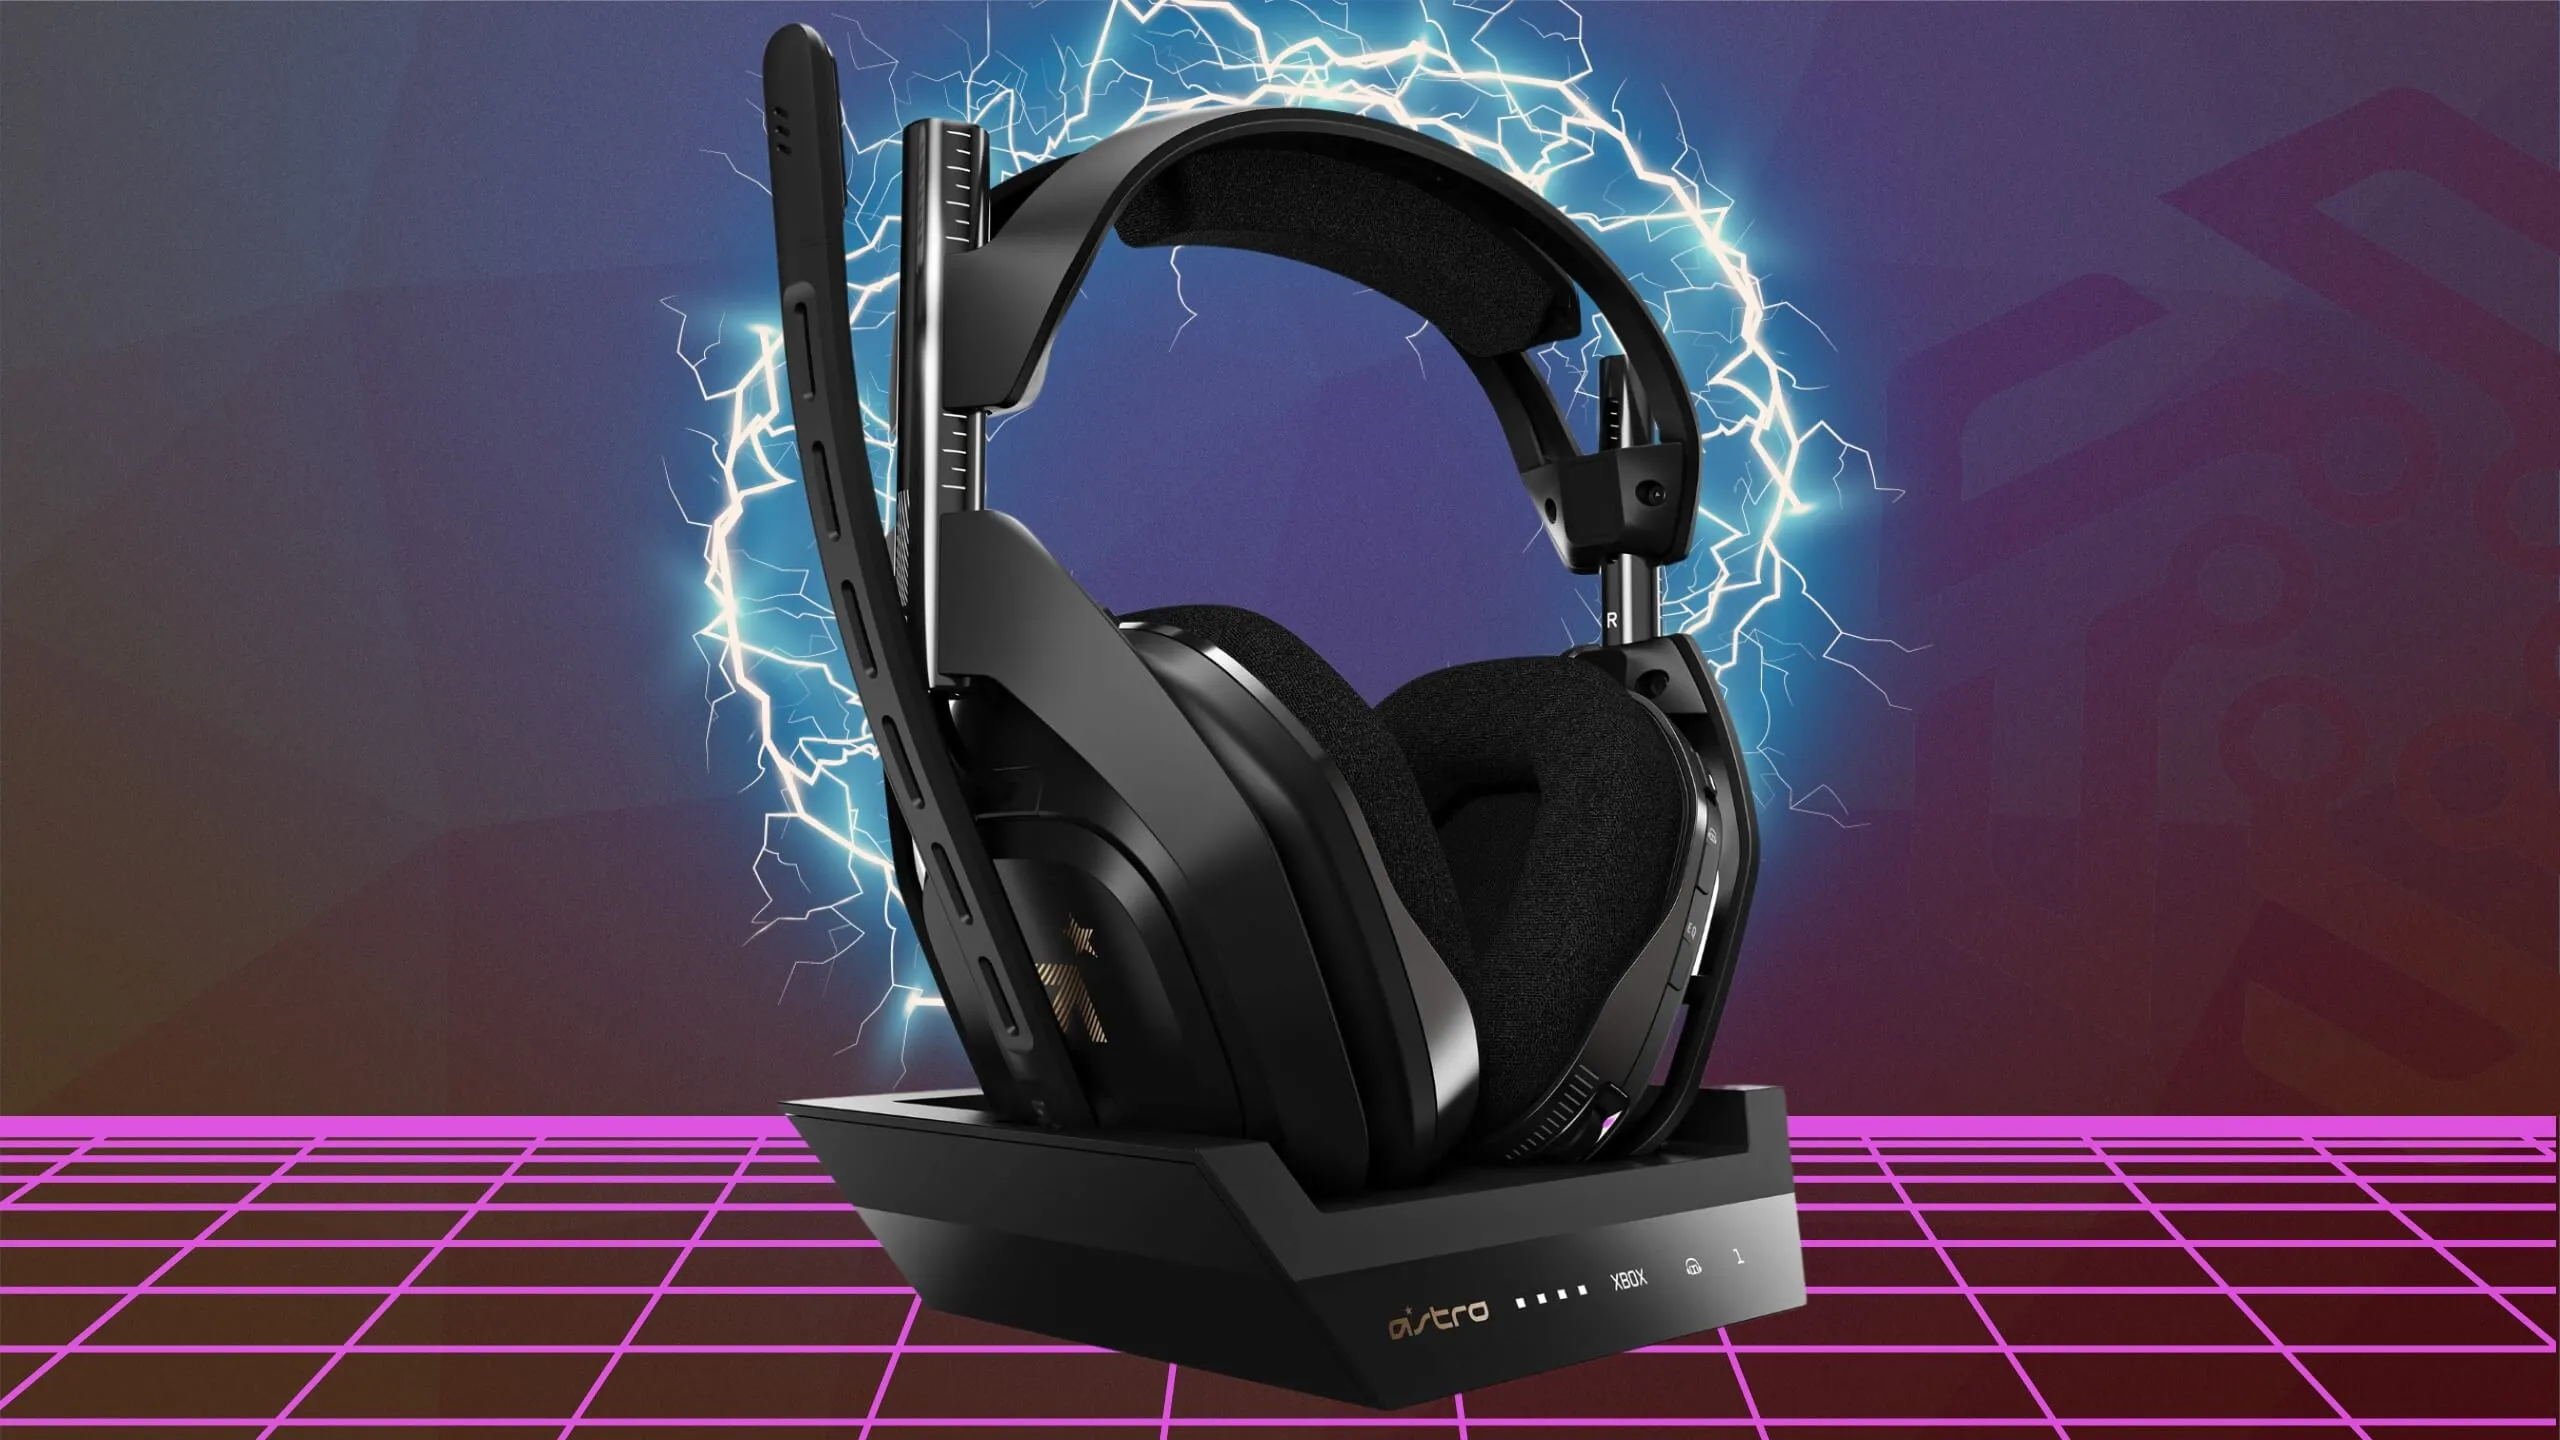 Astro A50 headset deal introducing teaser